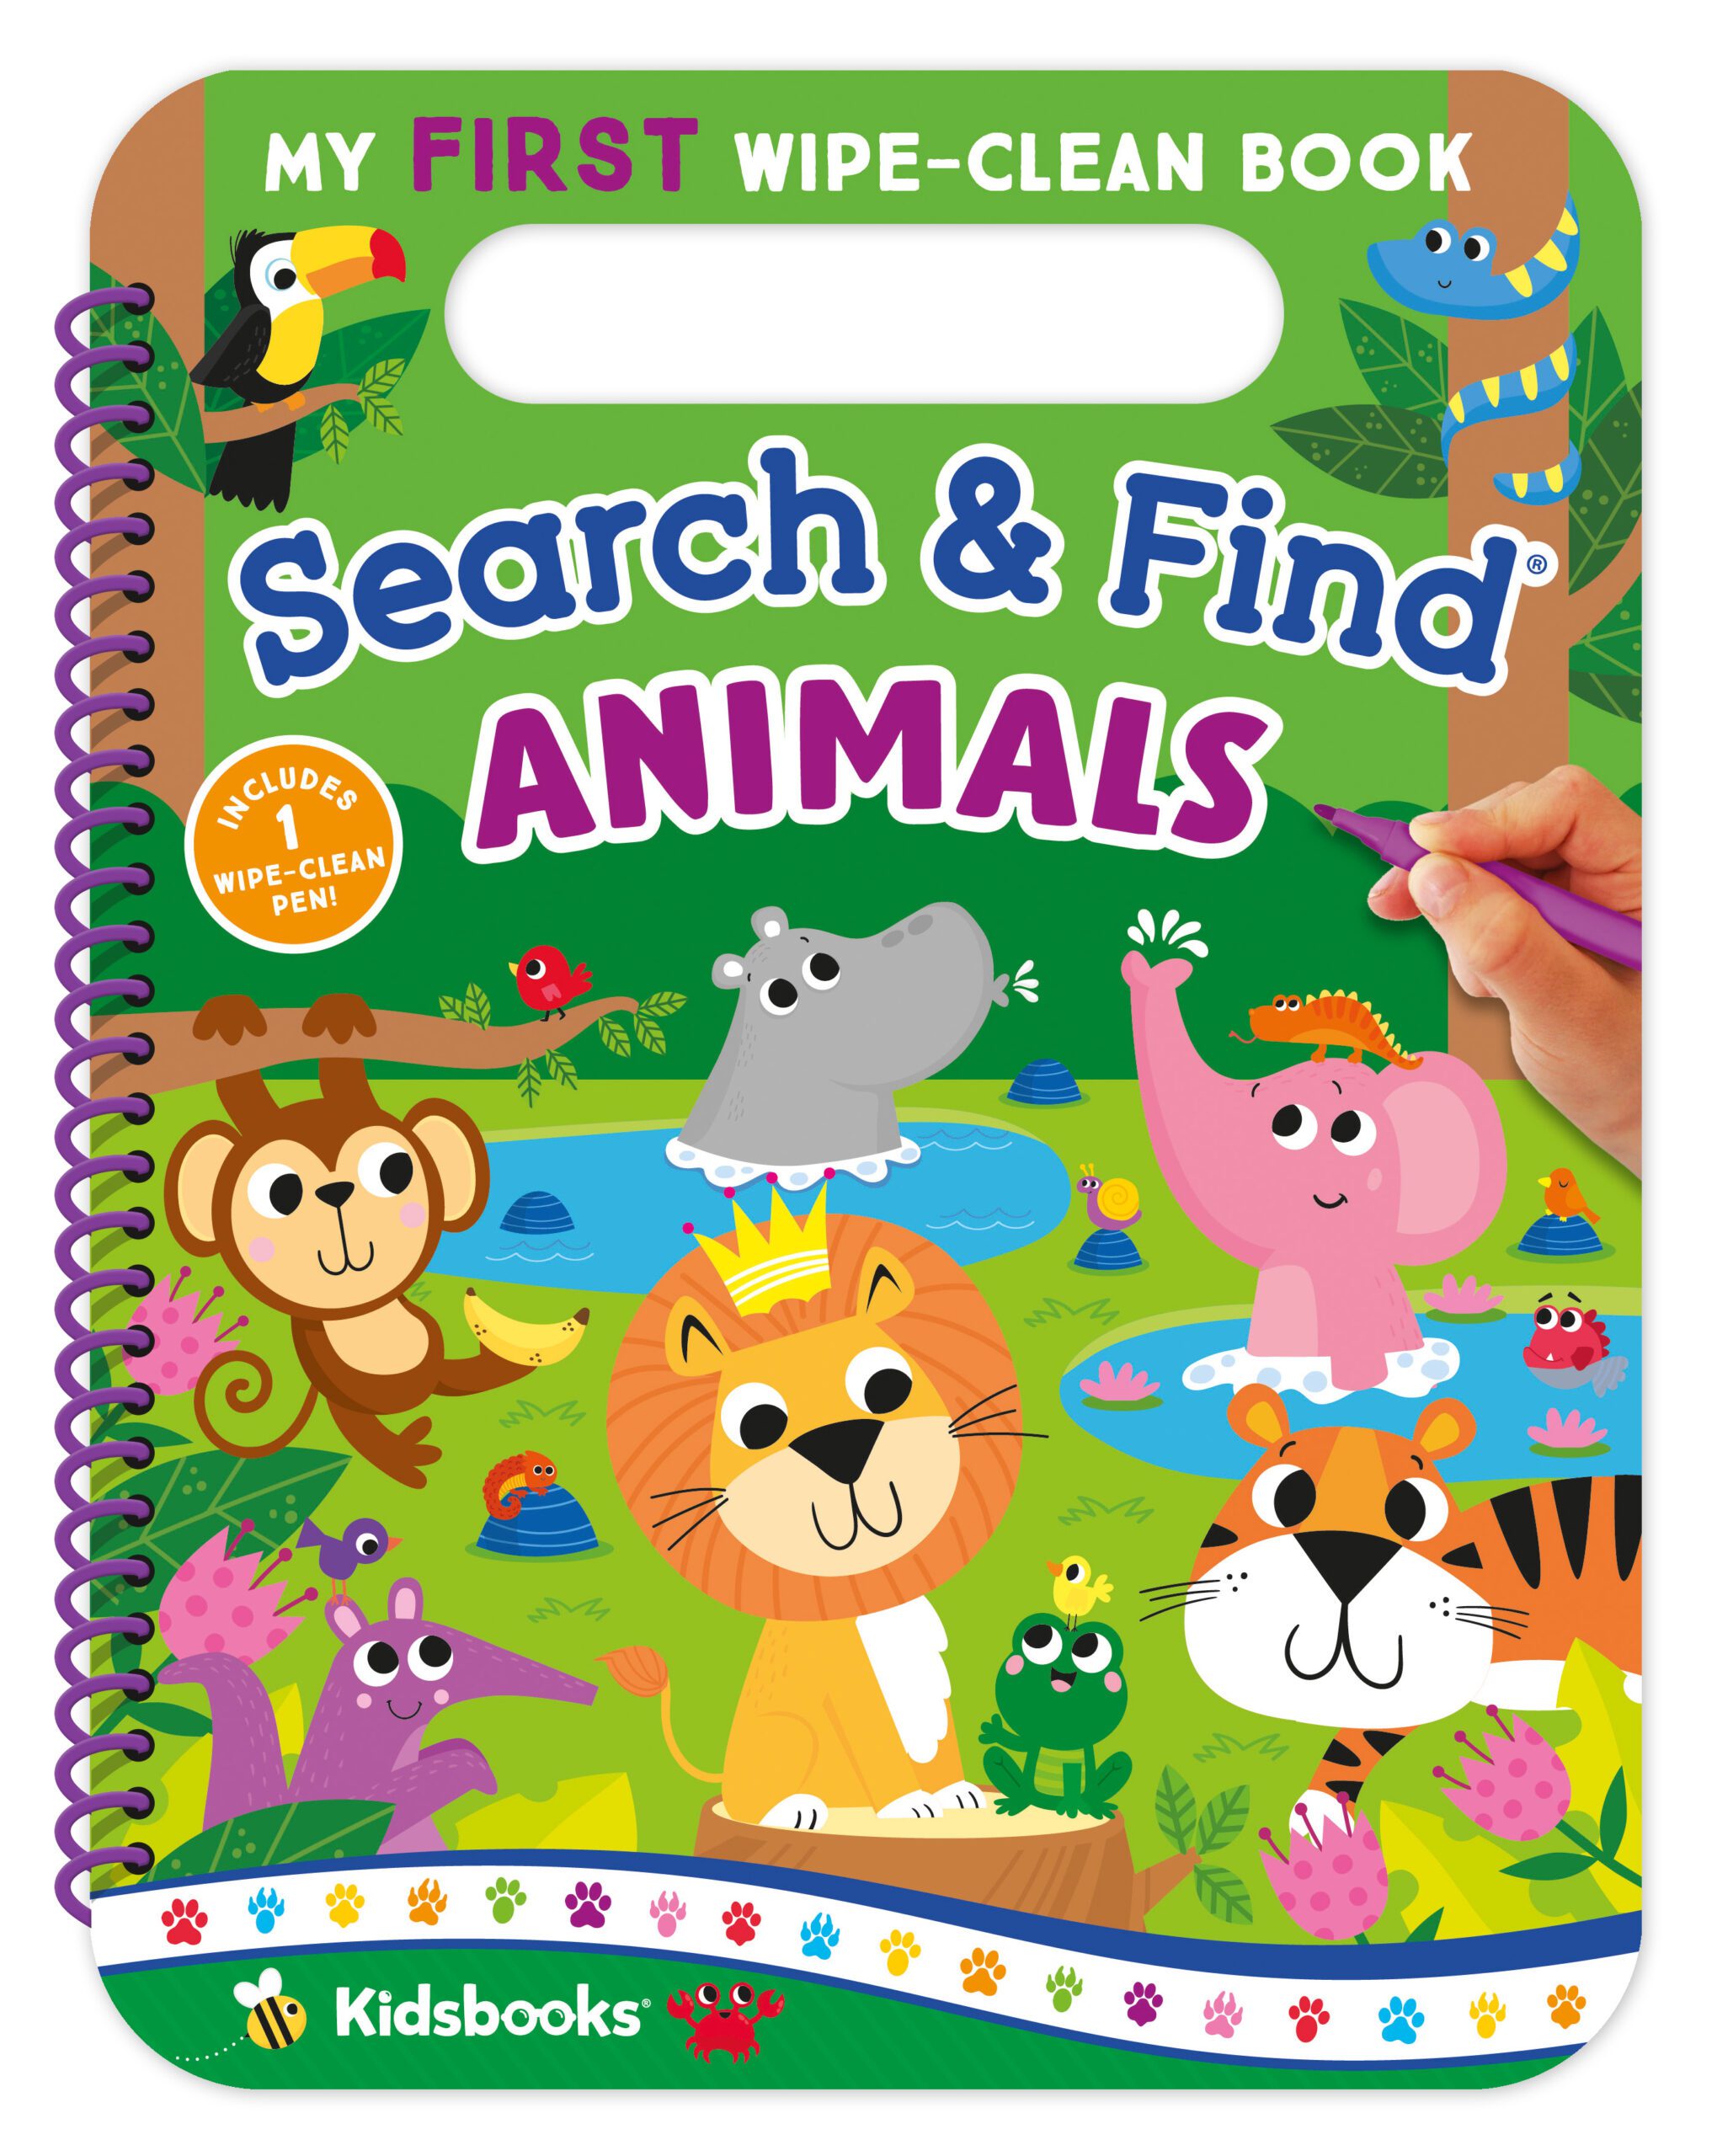 My First Wipe-Clean Book: Search & Find Animals | Kidsbooks Publishing